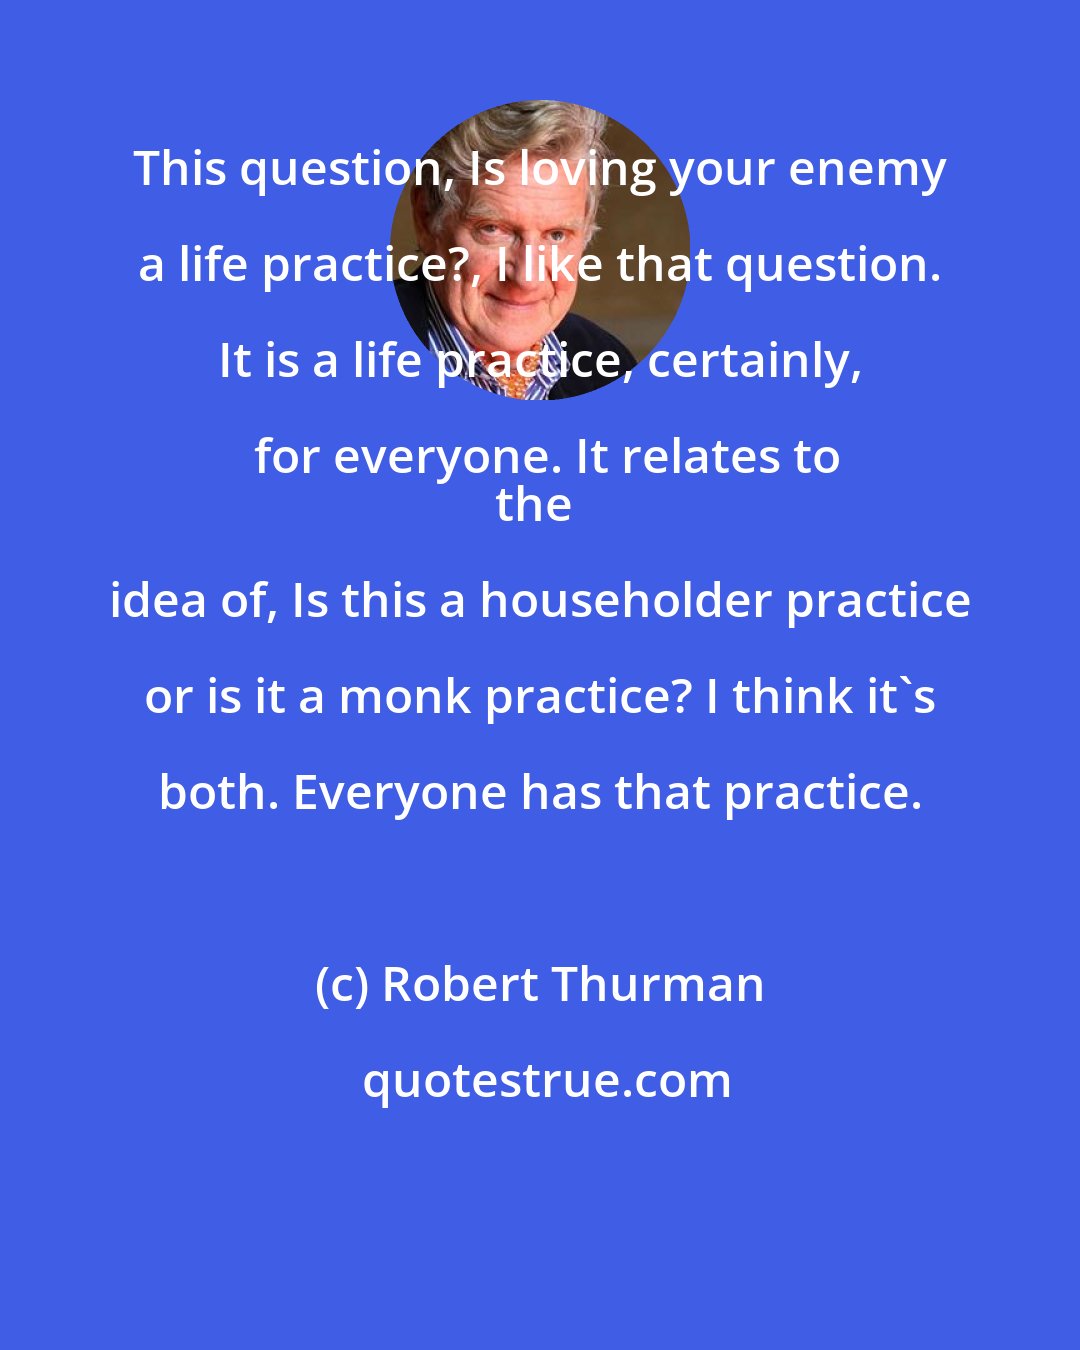 Robert Thurman: This question, Is loving your enemy a life practice?, I like that question. It is a life practice, certainly, for everyone. It relates to
the idea of, Is this a householder practice or is it a monk practice? I think it's both. Everyone has that practice.